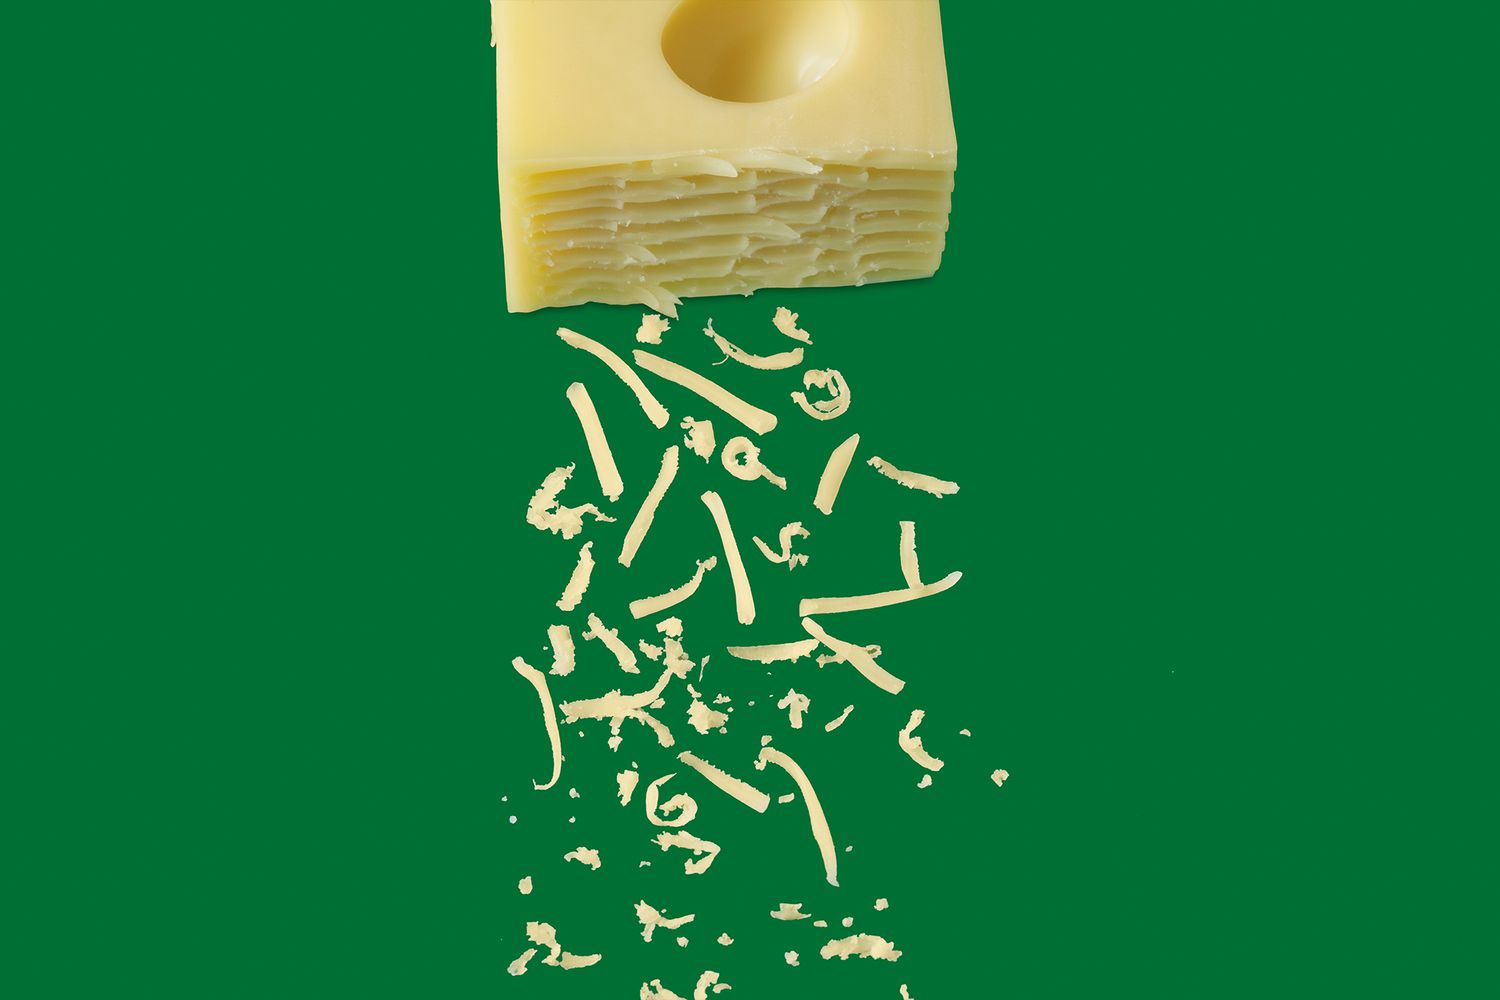 What will happen to the body if you eat cheese every day